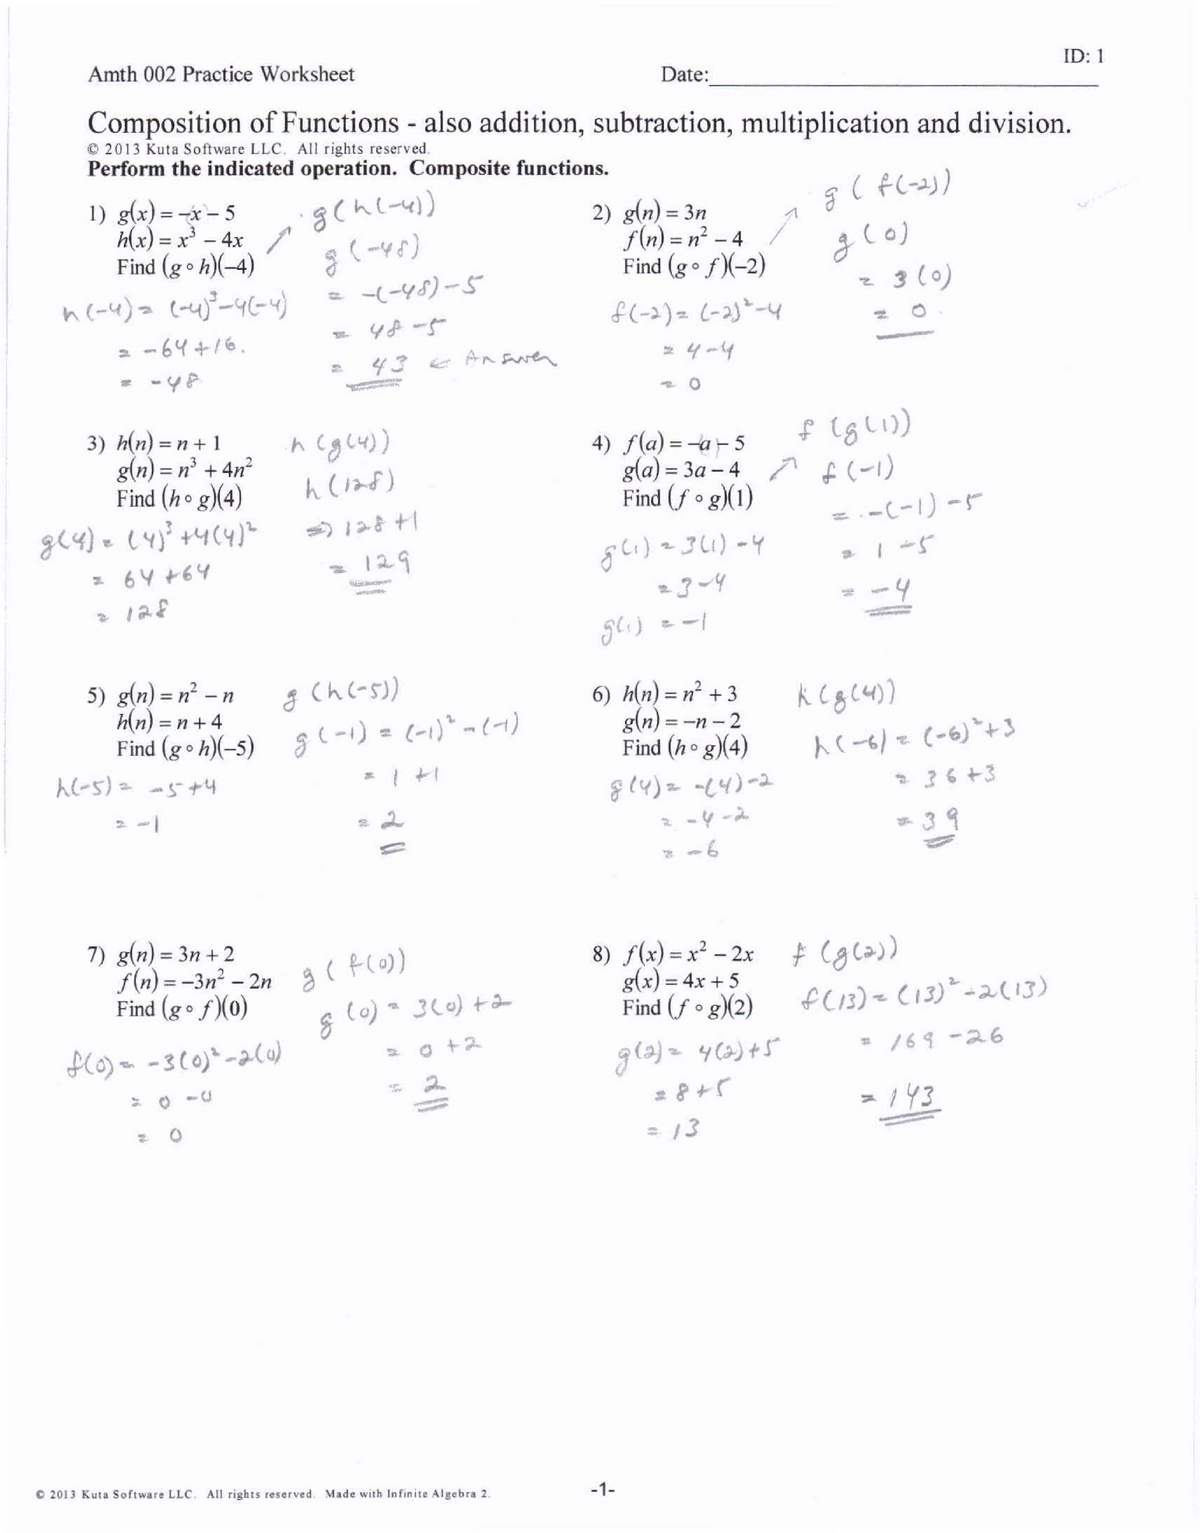 Composition of Functions Answers - AMTH 22 - Mathematics II - UR Intended For Operations With Functions Worksheet